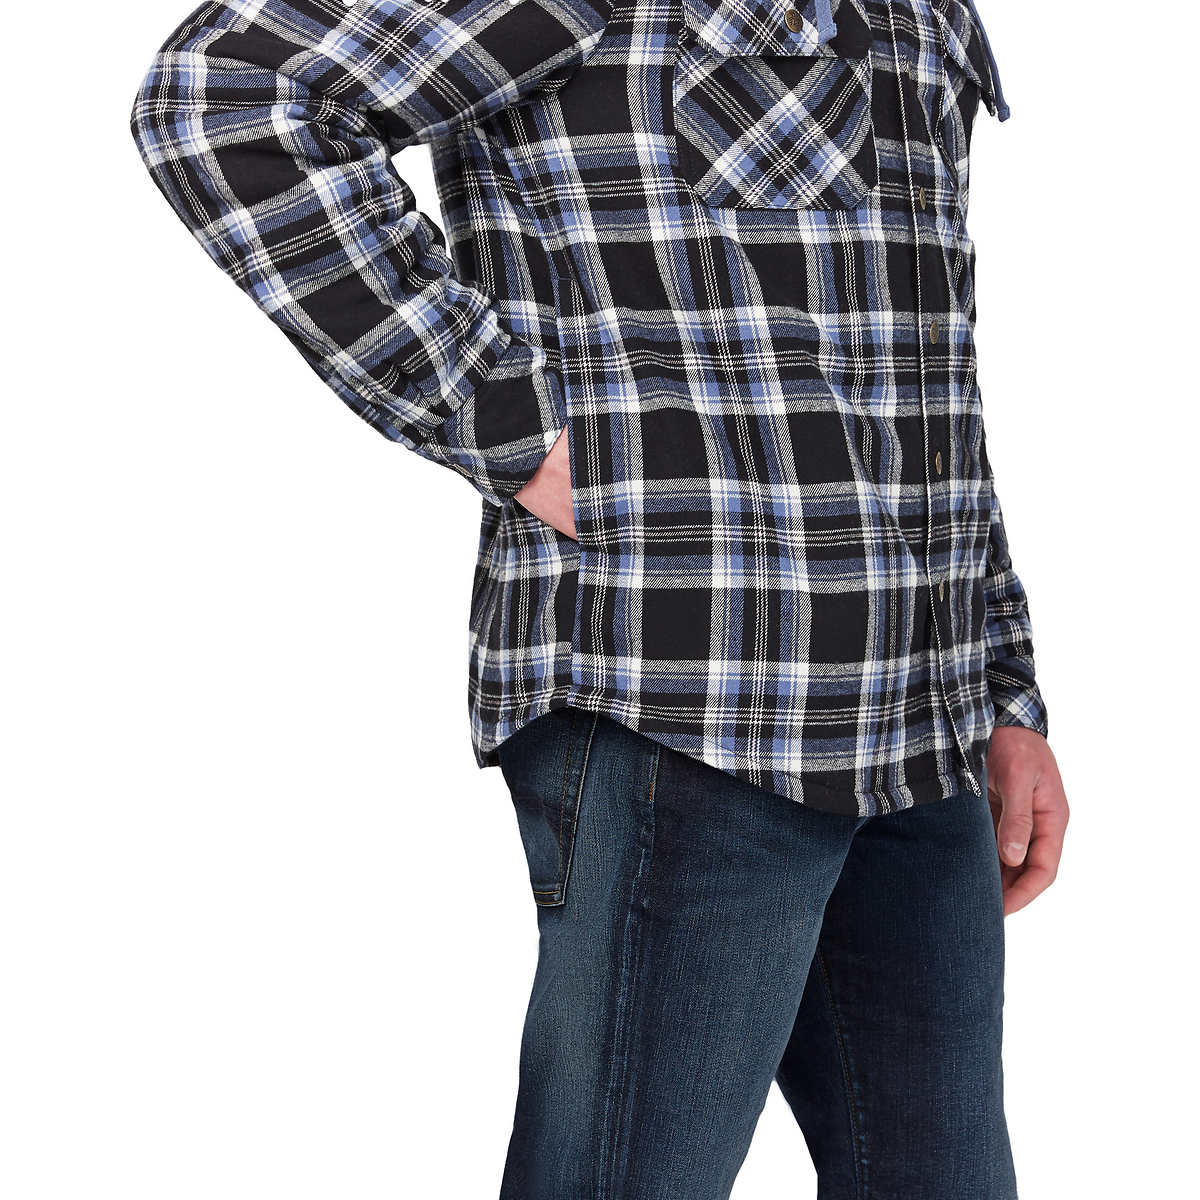 Legendary Outfitters Men’s Plaid Insulated Casual Hooded Shirt Jacket